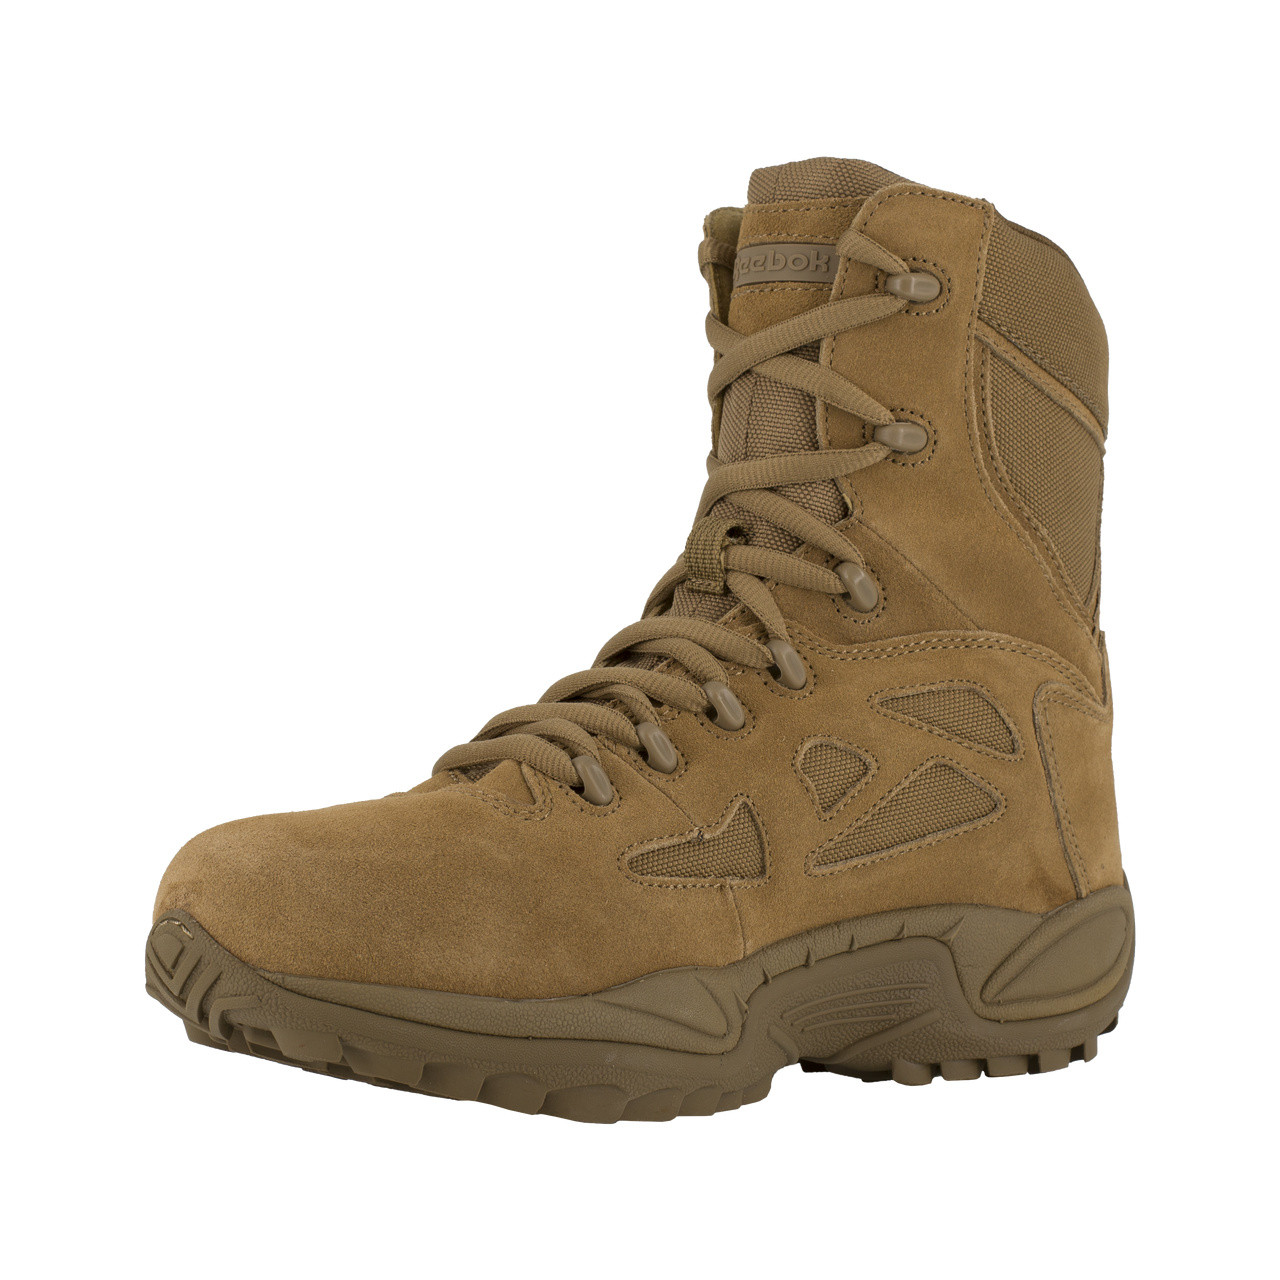 REEBOK RAPID RESPONSE RB WOMEN'S 8" STEALTH COYOTE BOOTS RB897